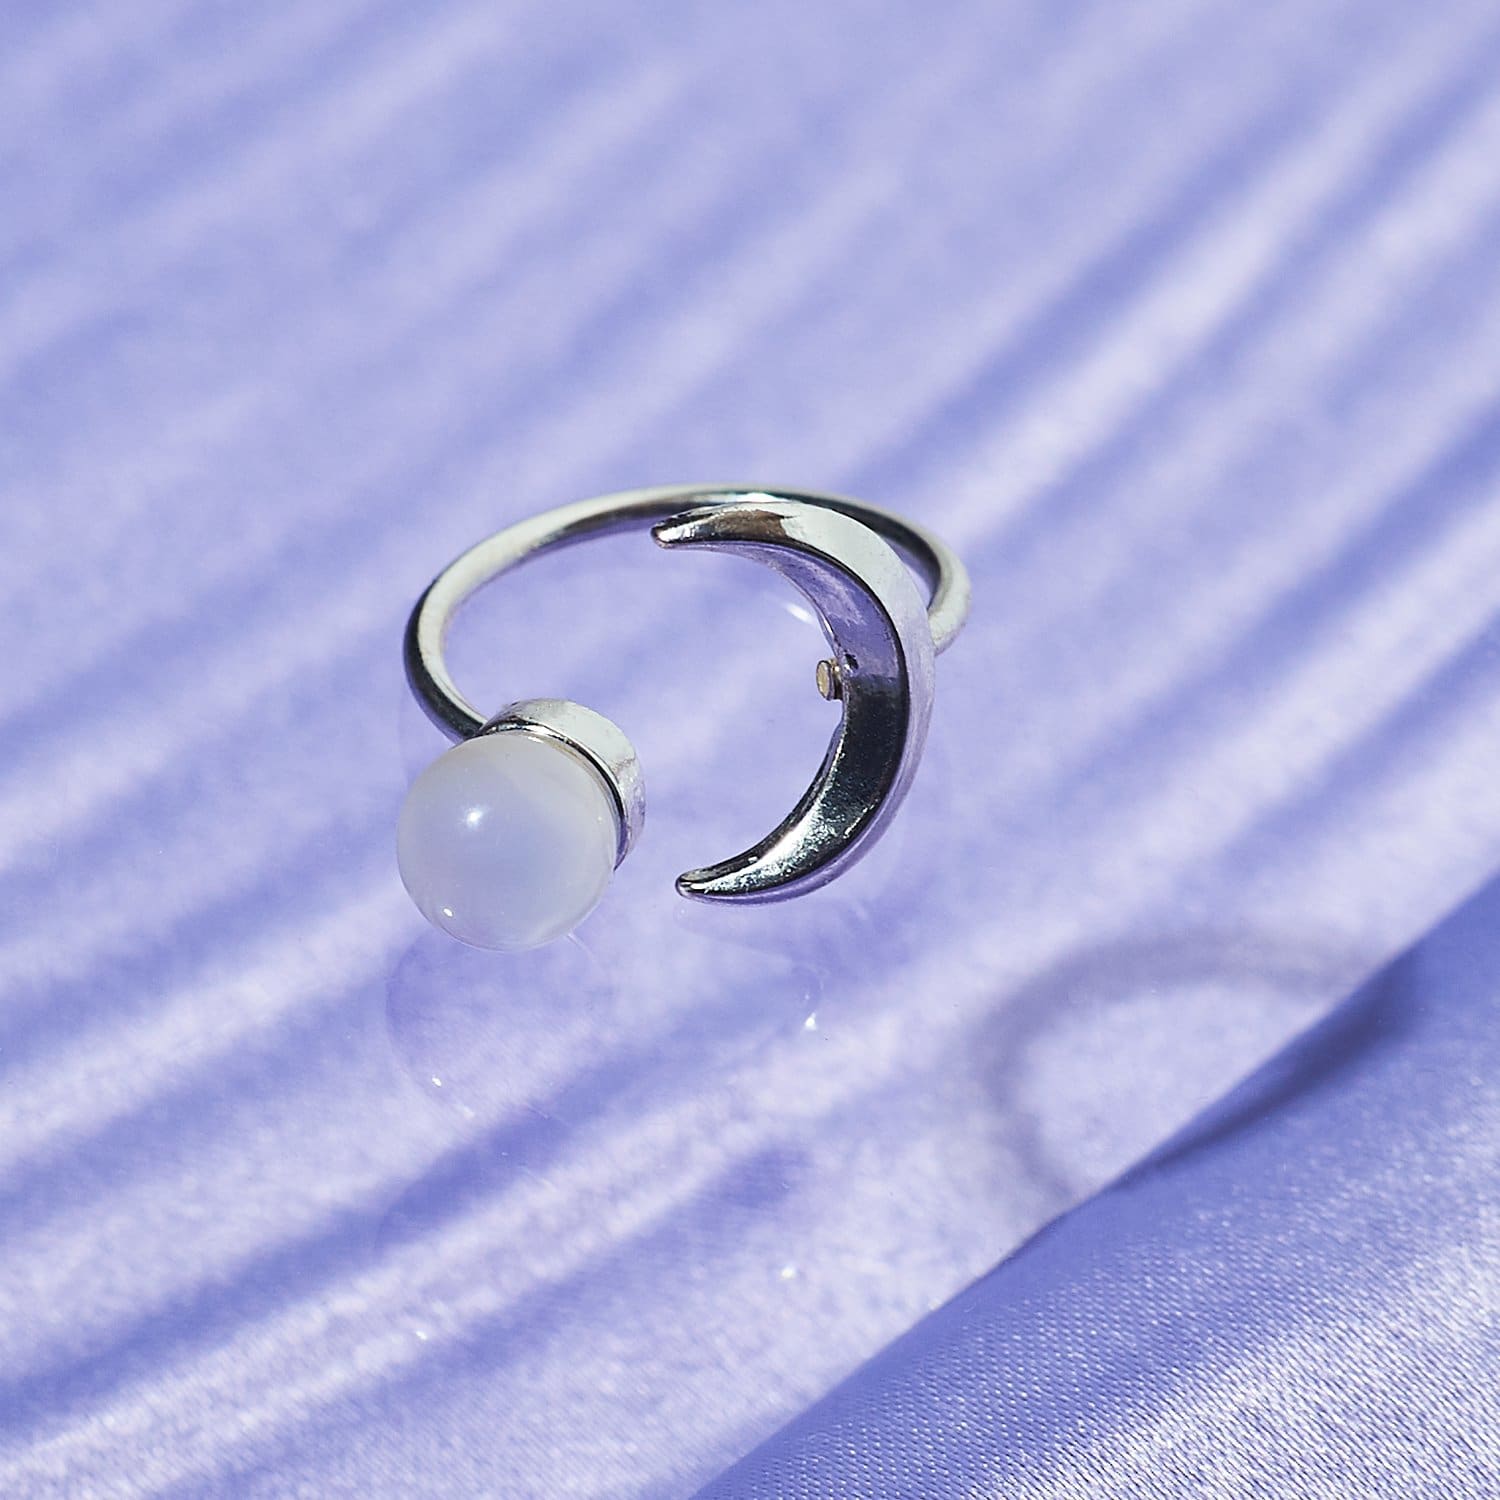 Silver Plated Moonstone Ring 90s - Friends Her/them - 